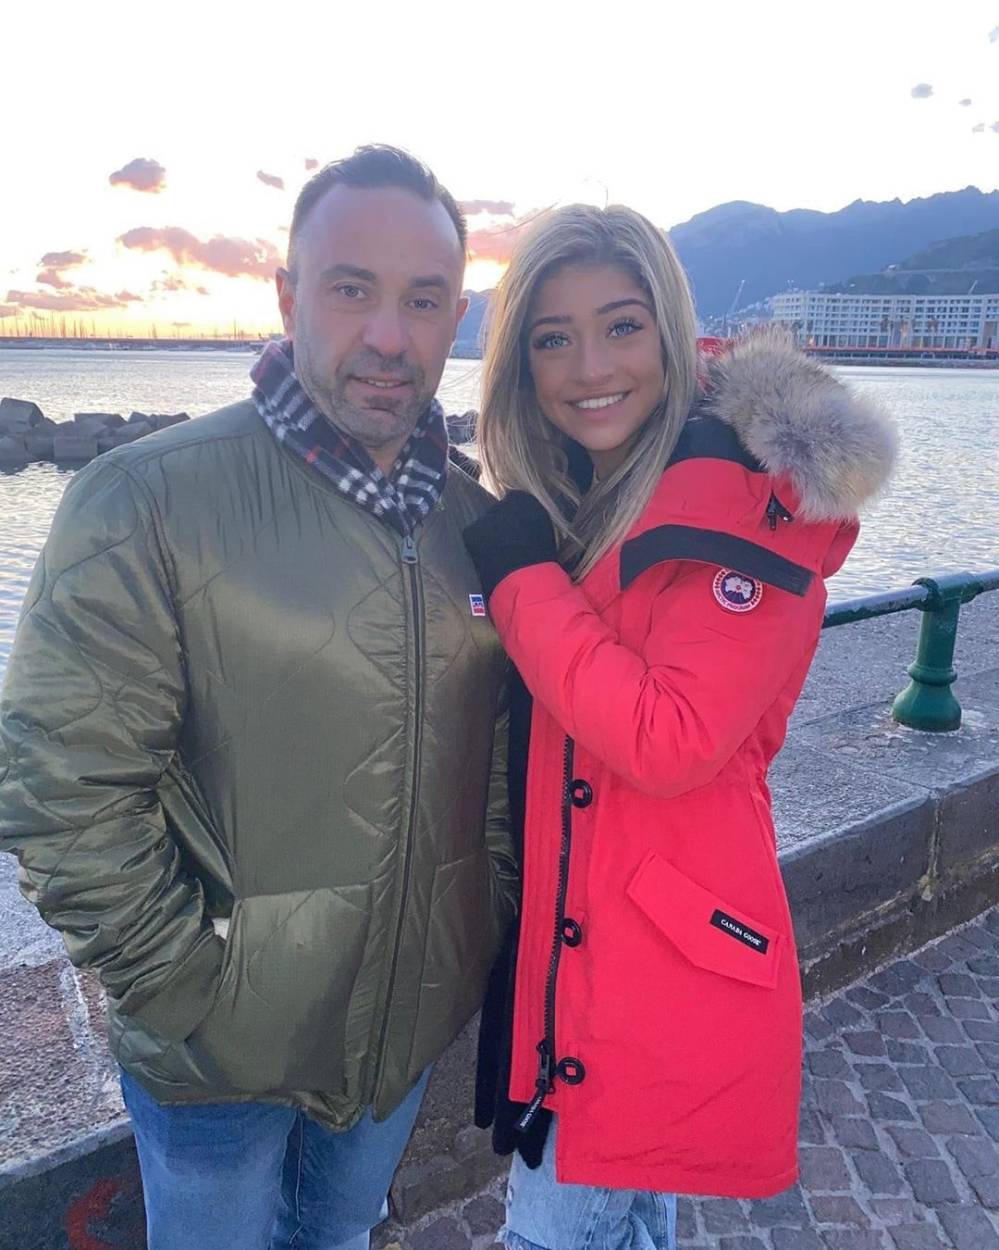 Joe Giudice Tells Daughter Gia He Made 'Tons of Mistakes' in 19th Birthday Tribute